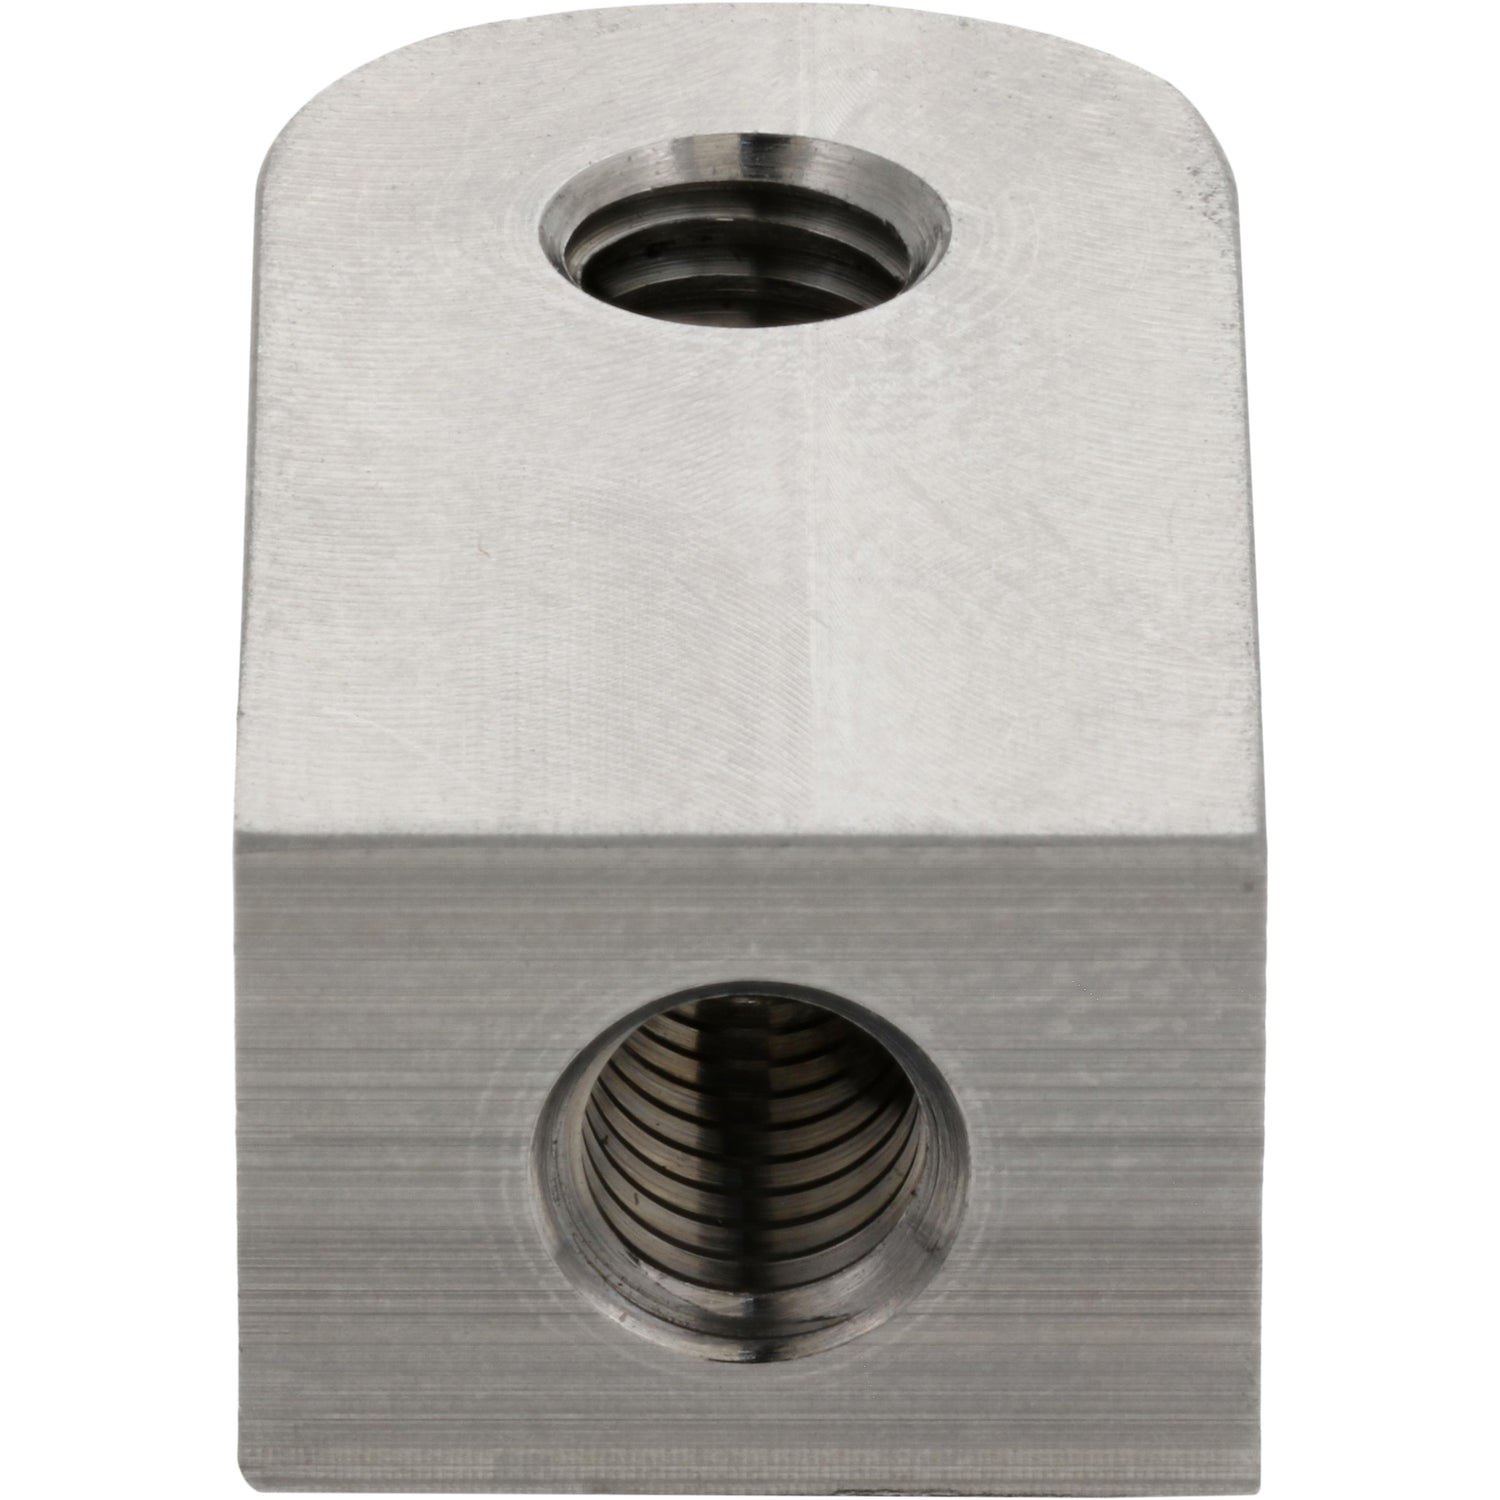 Stainless Steel Rectangular block with one rounded end and two threaded holes shown on white background. 